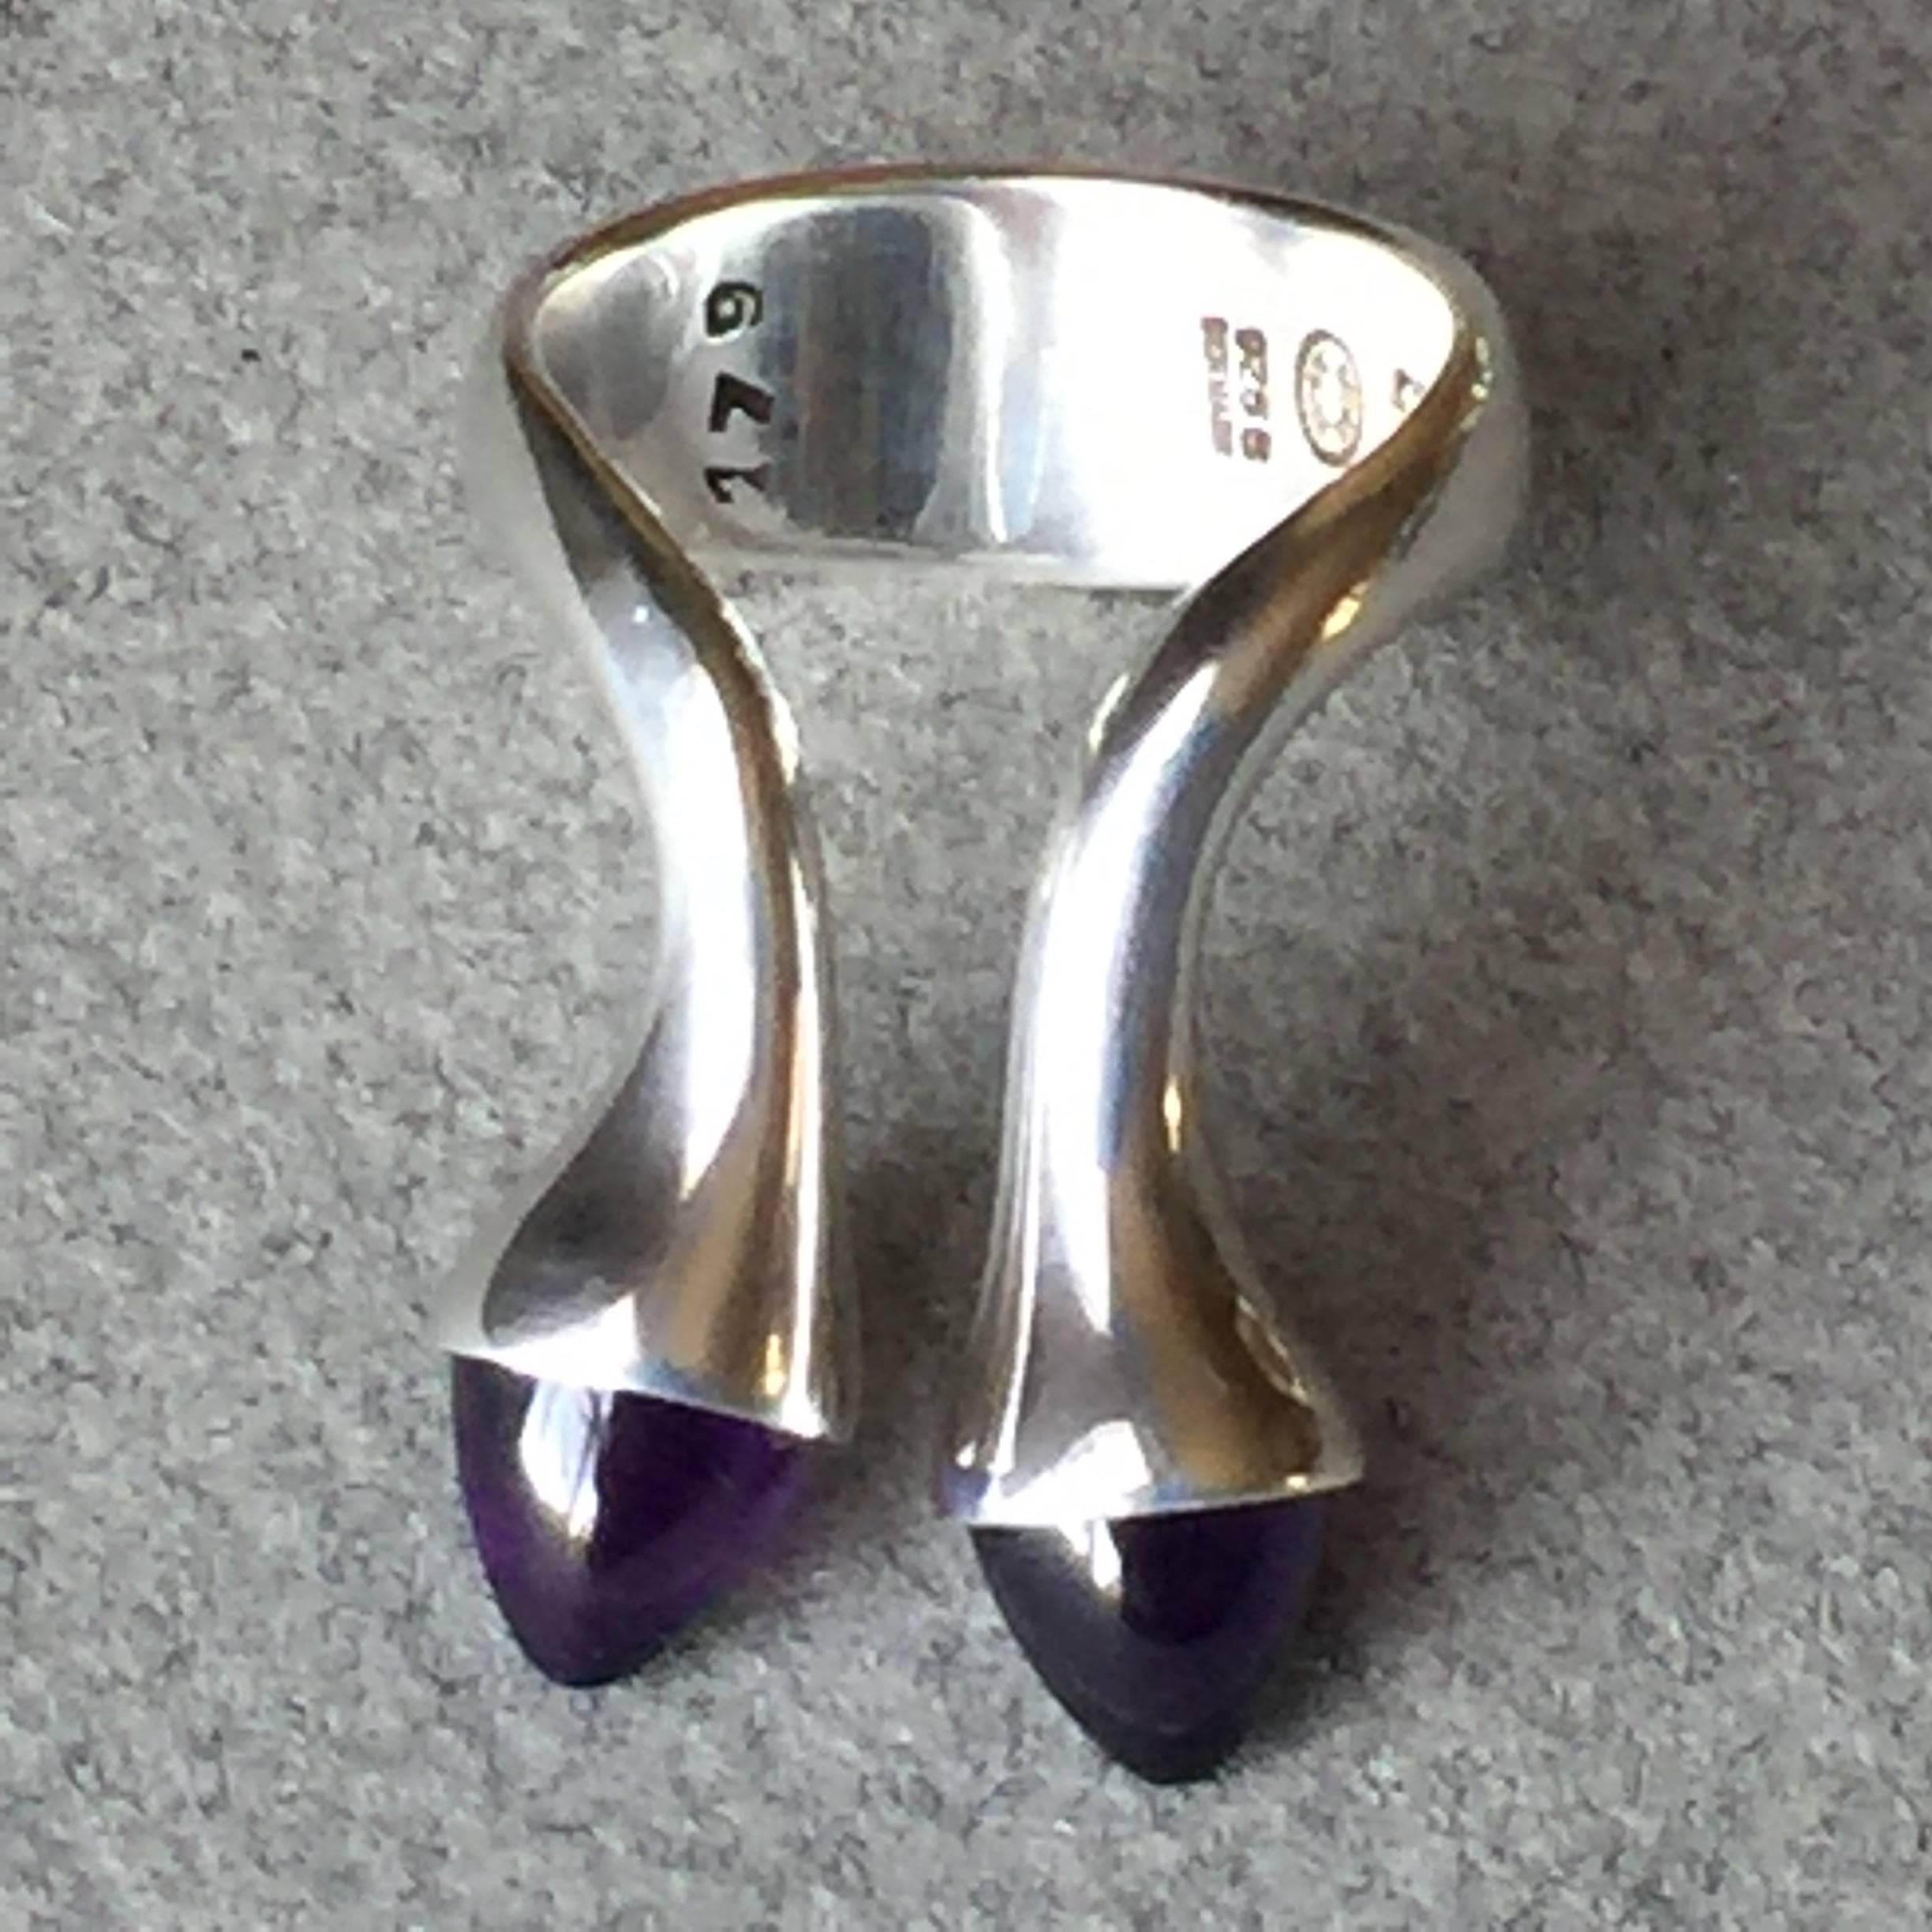 Georg Jensen Sterling Silver Ring No. 179 by Bent Gabrielsen with pair of amethyst bullet shaped cabochons.

Unique modernist design with two protruding bullet shaped cabochons.

Complimentary gift box and FREE shipping included.

About the